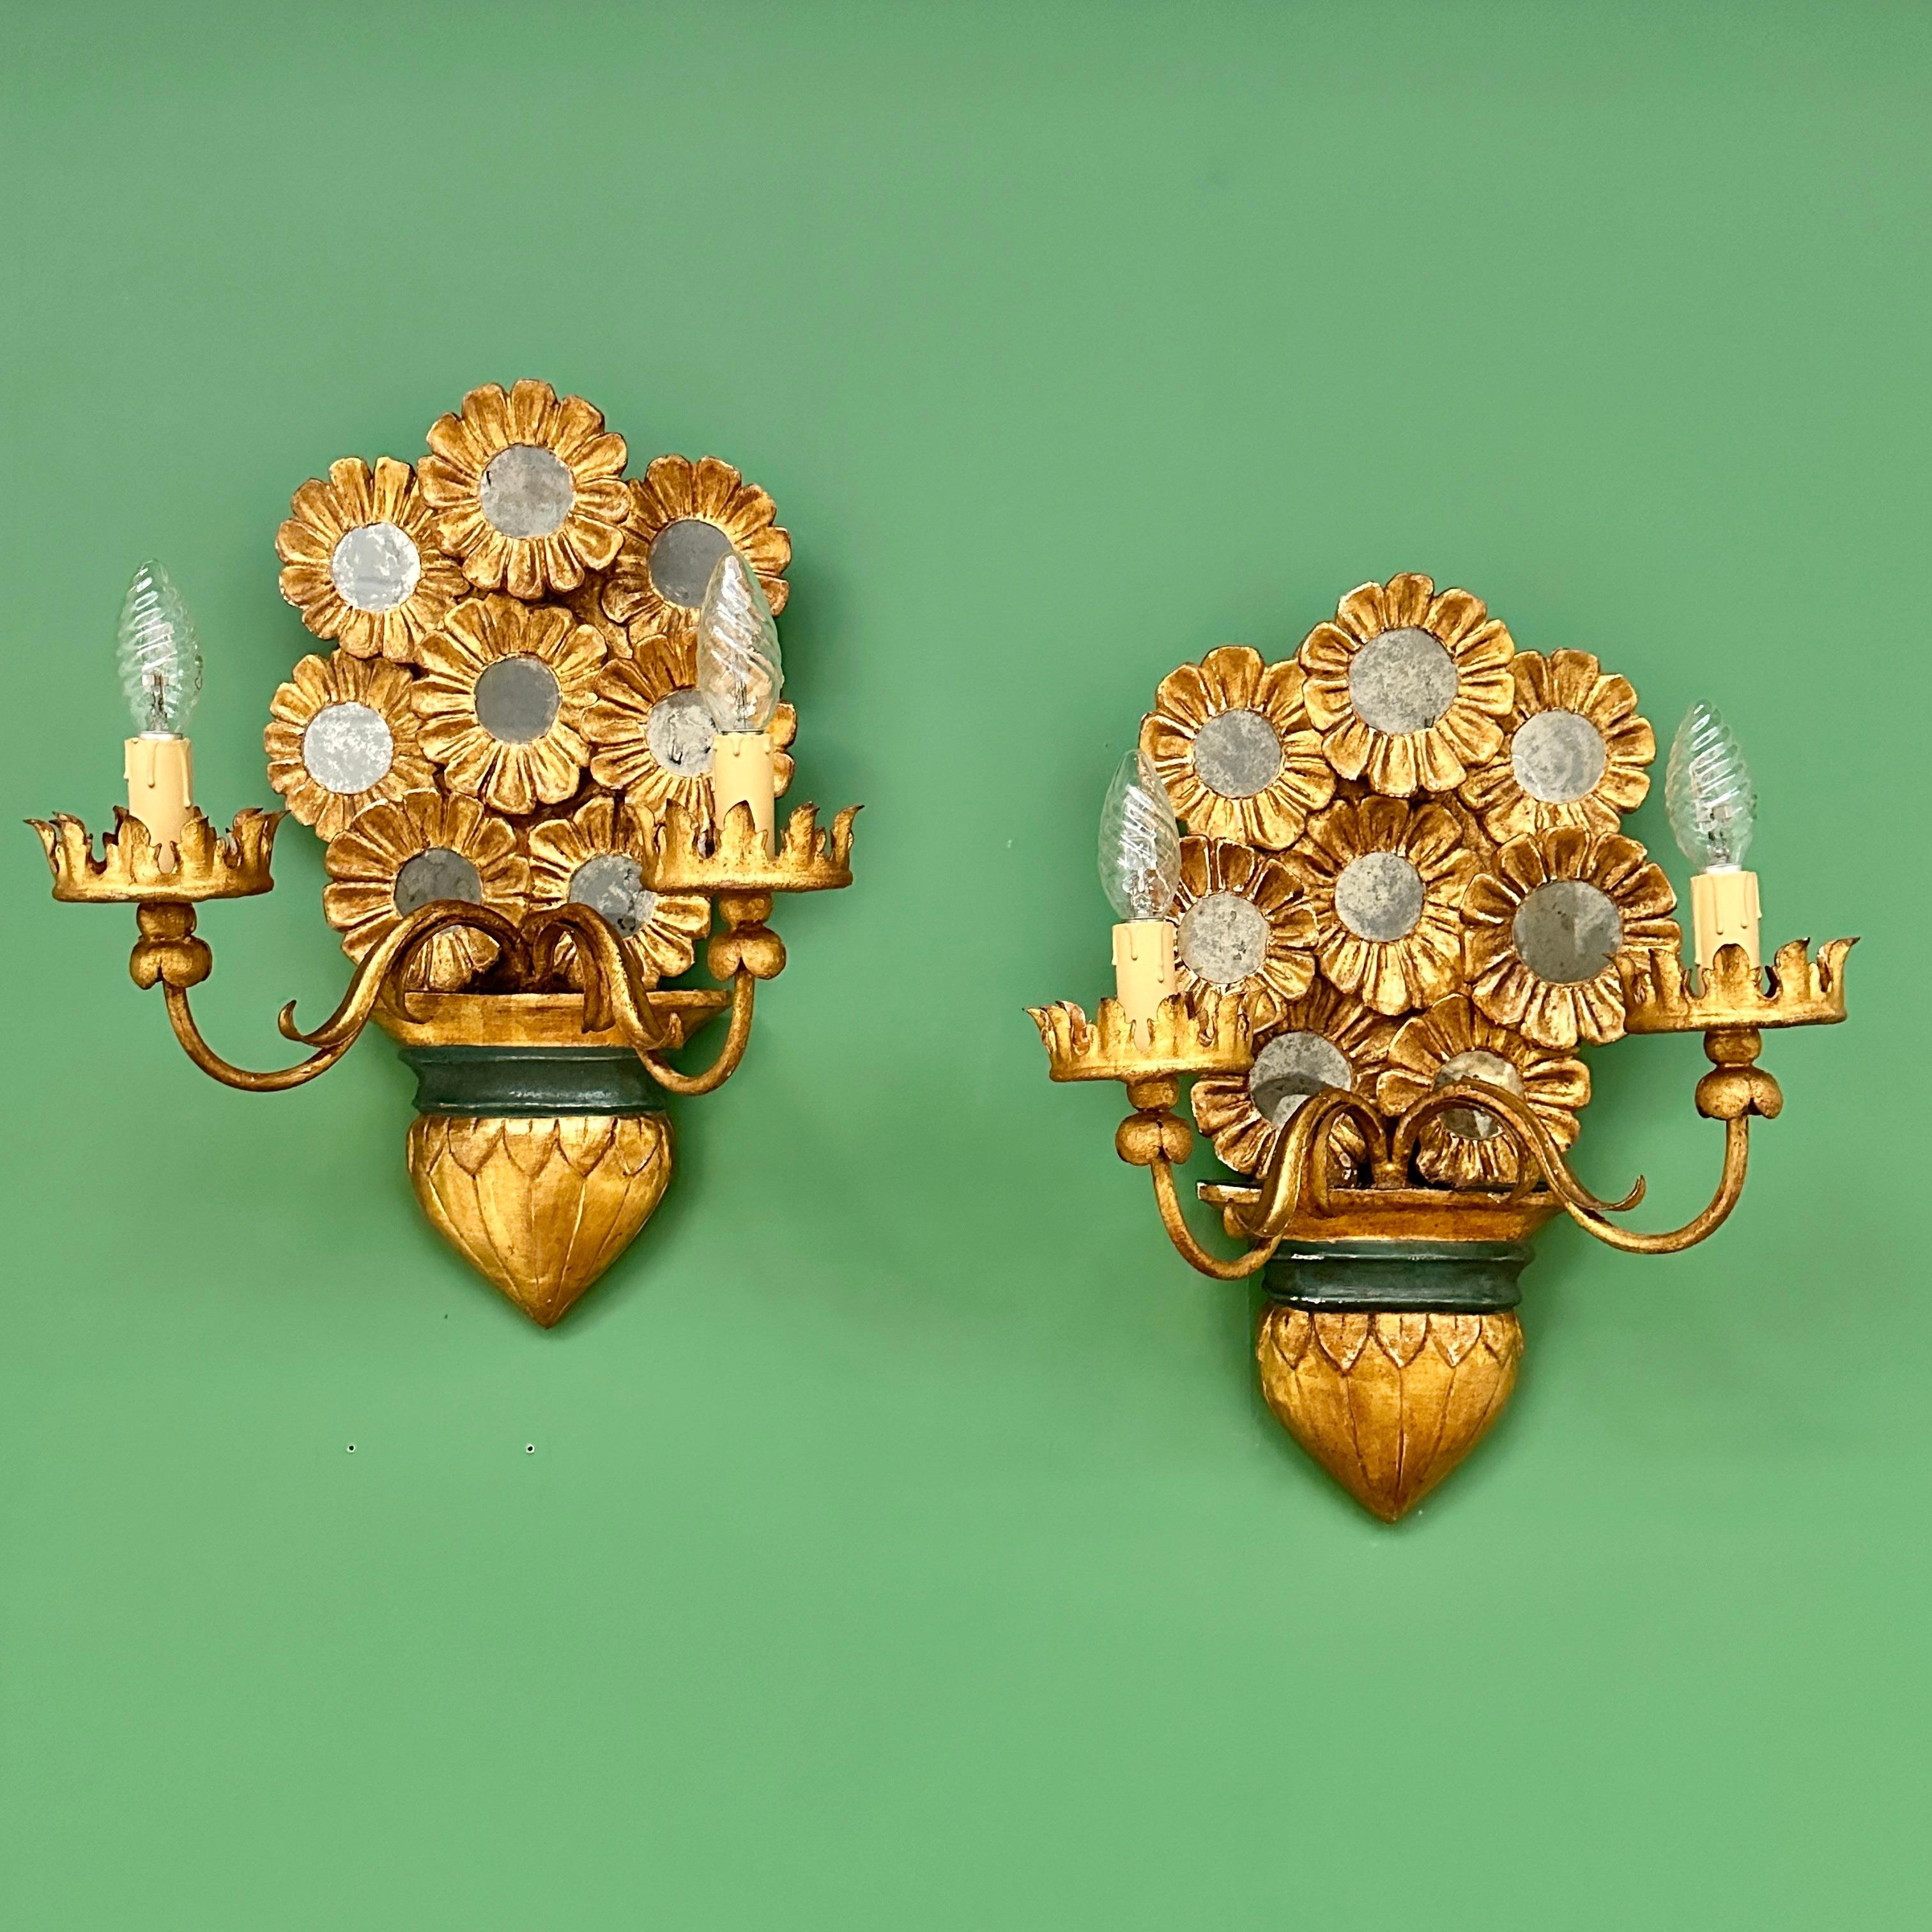 Pair of early C20th Italian giltwood wall lights (1 of 2 pairs available).

Exceptional and unique carved sconces with eight decorative flowers each featuring a beautifully foxed mirror. Acquired from a Liberty style villa in Lucca and in excellent